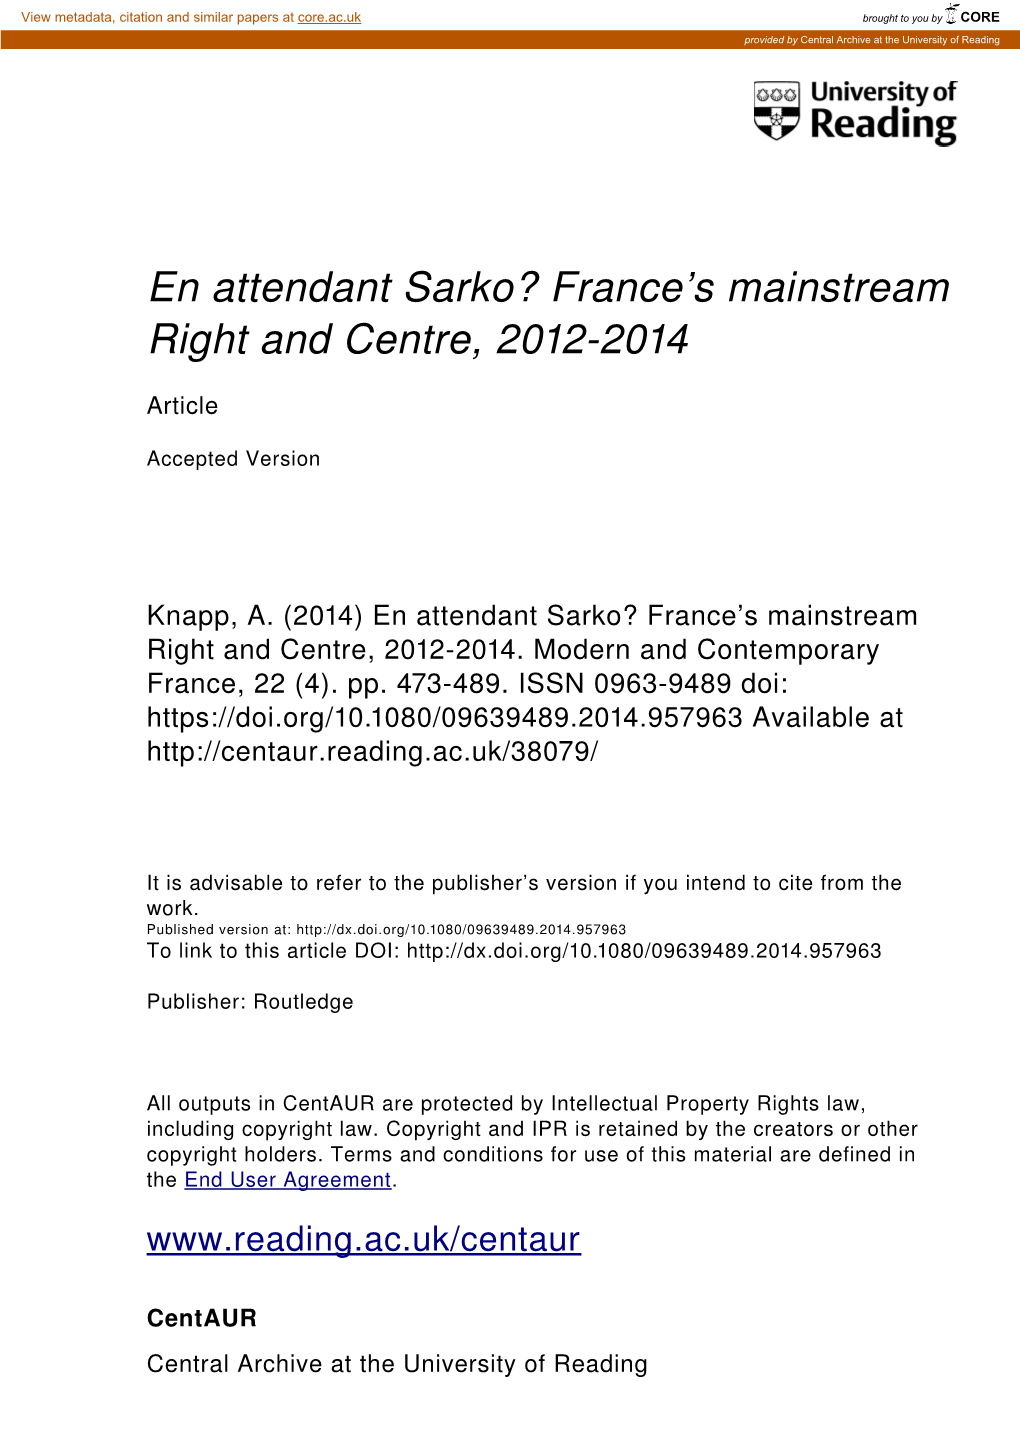 En Attendant Sarko? France's Mainstream Right and Centre